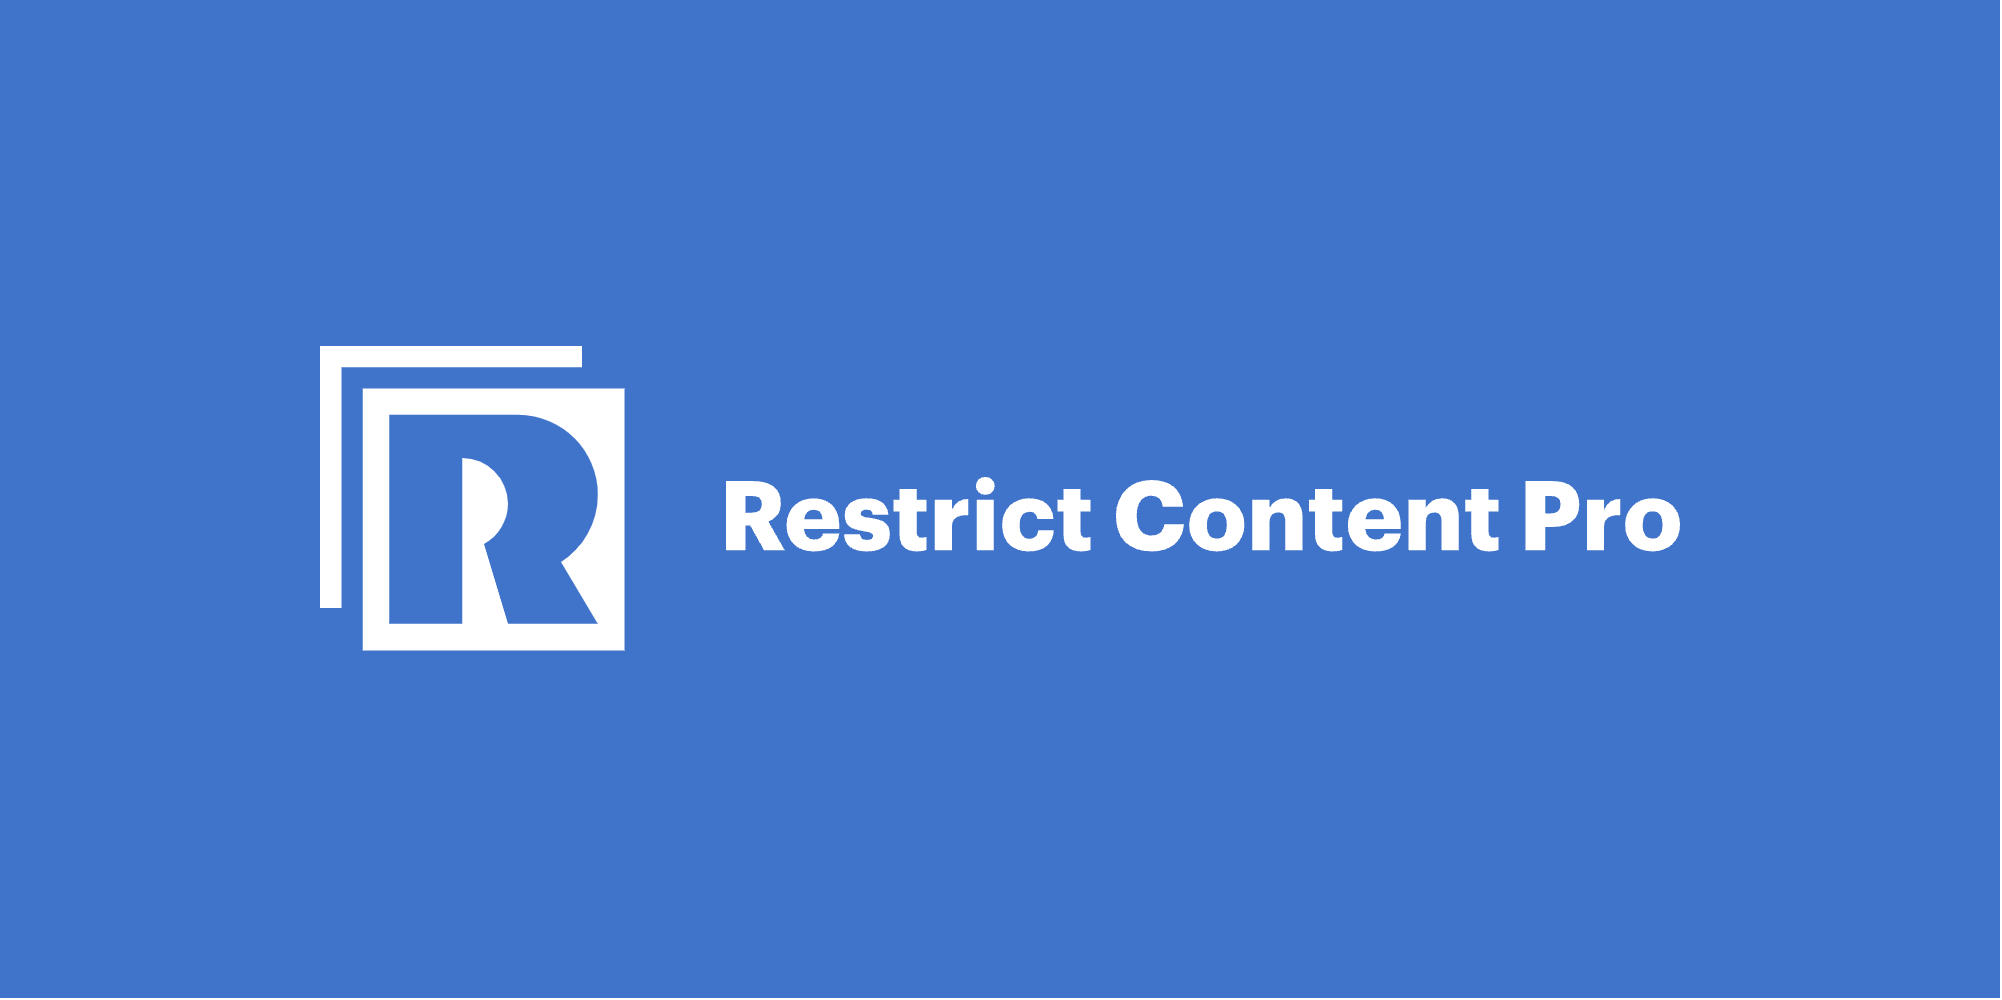 Restrict Content Pro: An In-Depth Overview